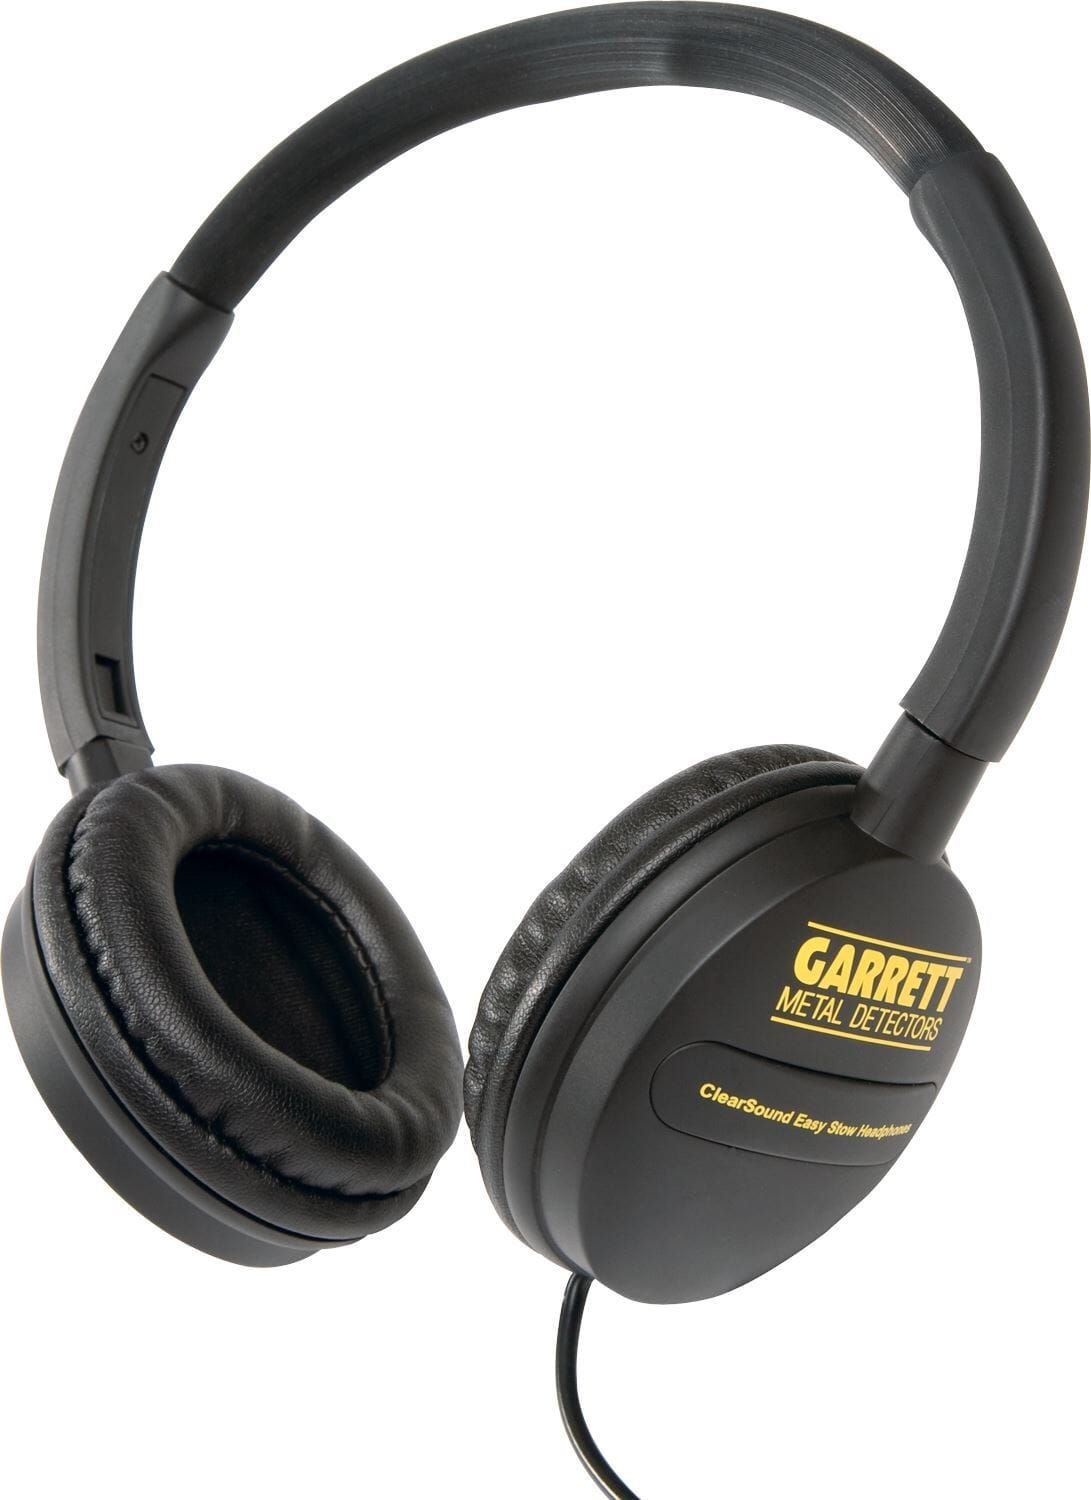 garrett clear sound headphones included with metal detector